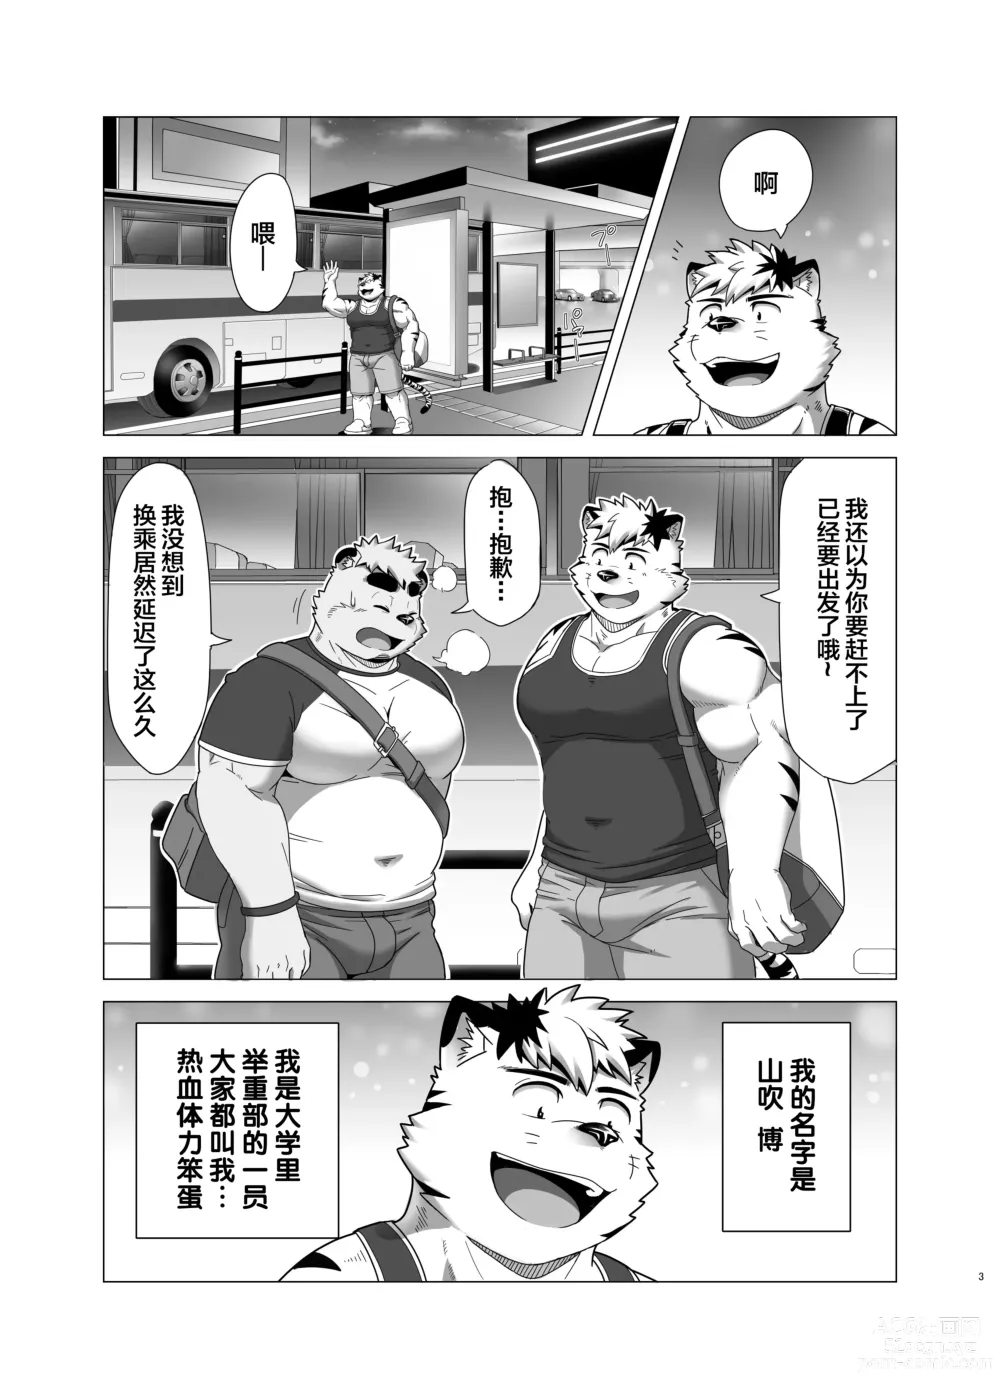 Page 2 of doujinshi MIDNIGHT APPROACH